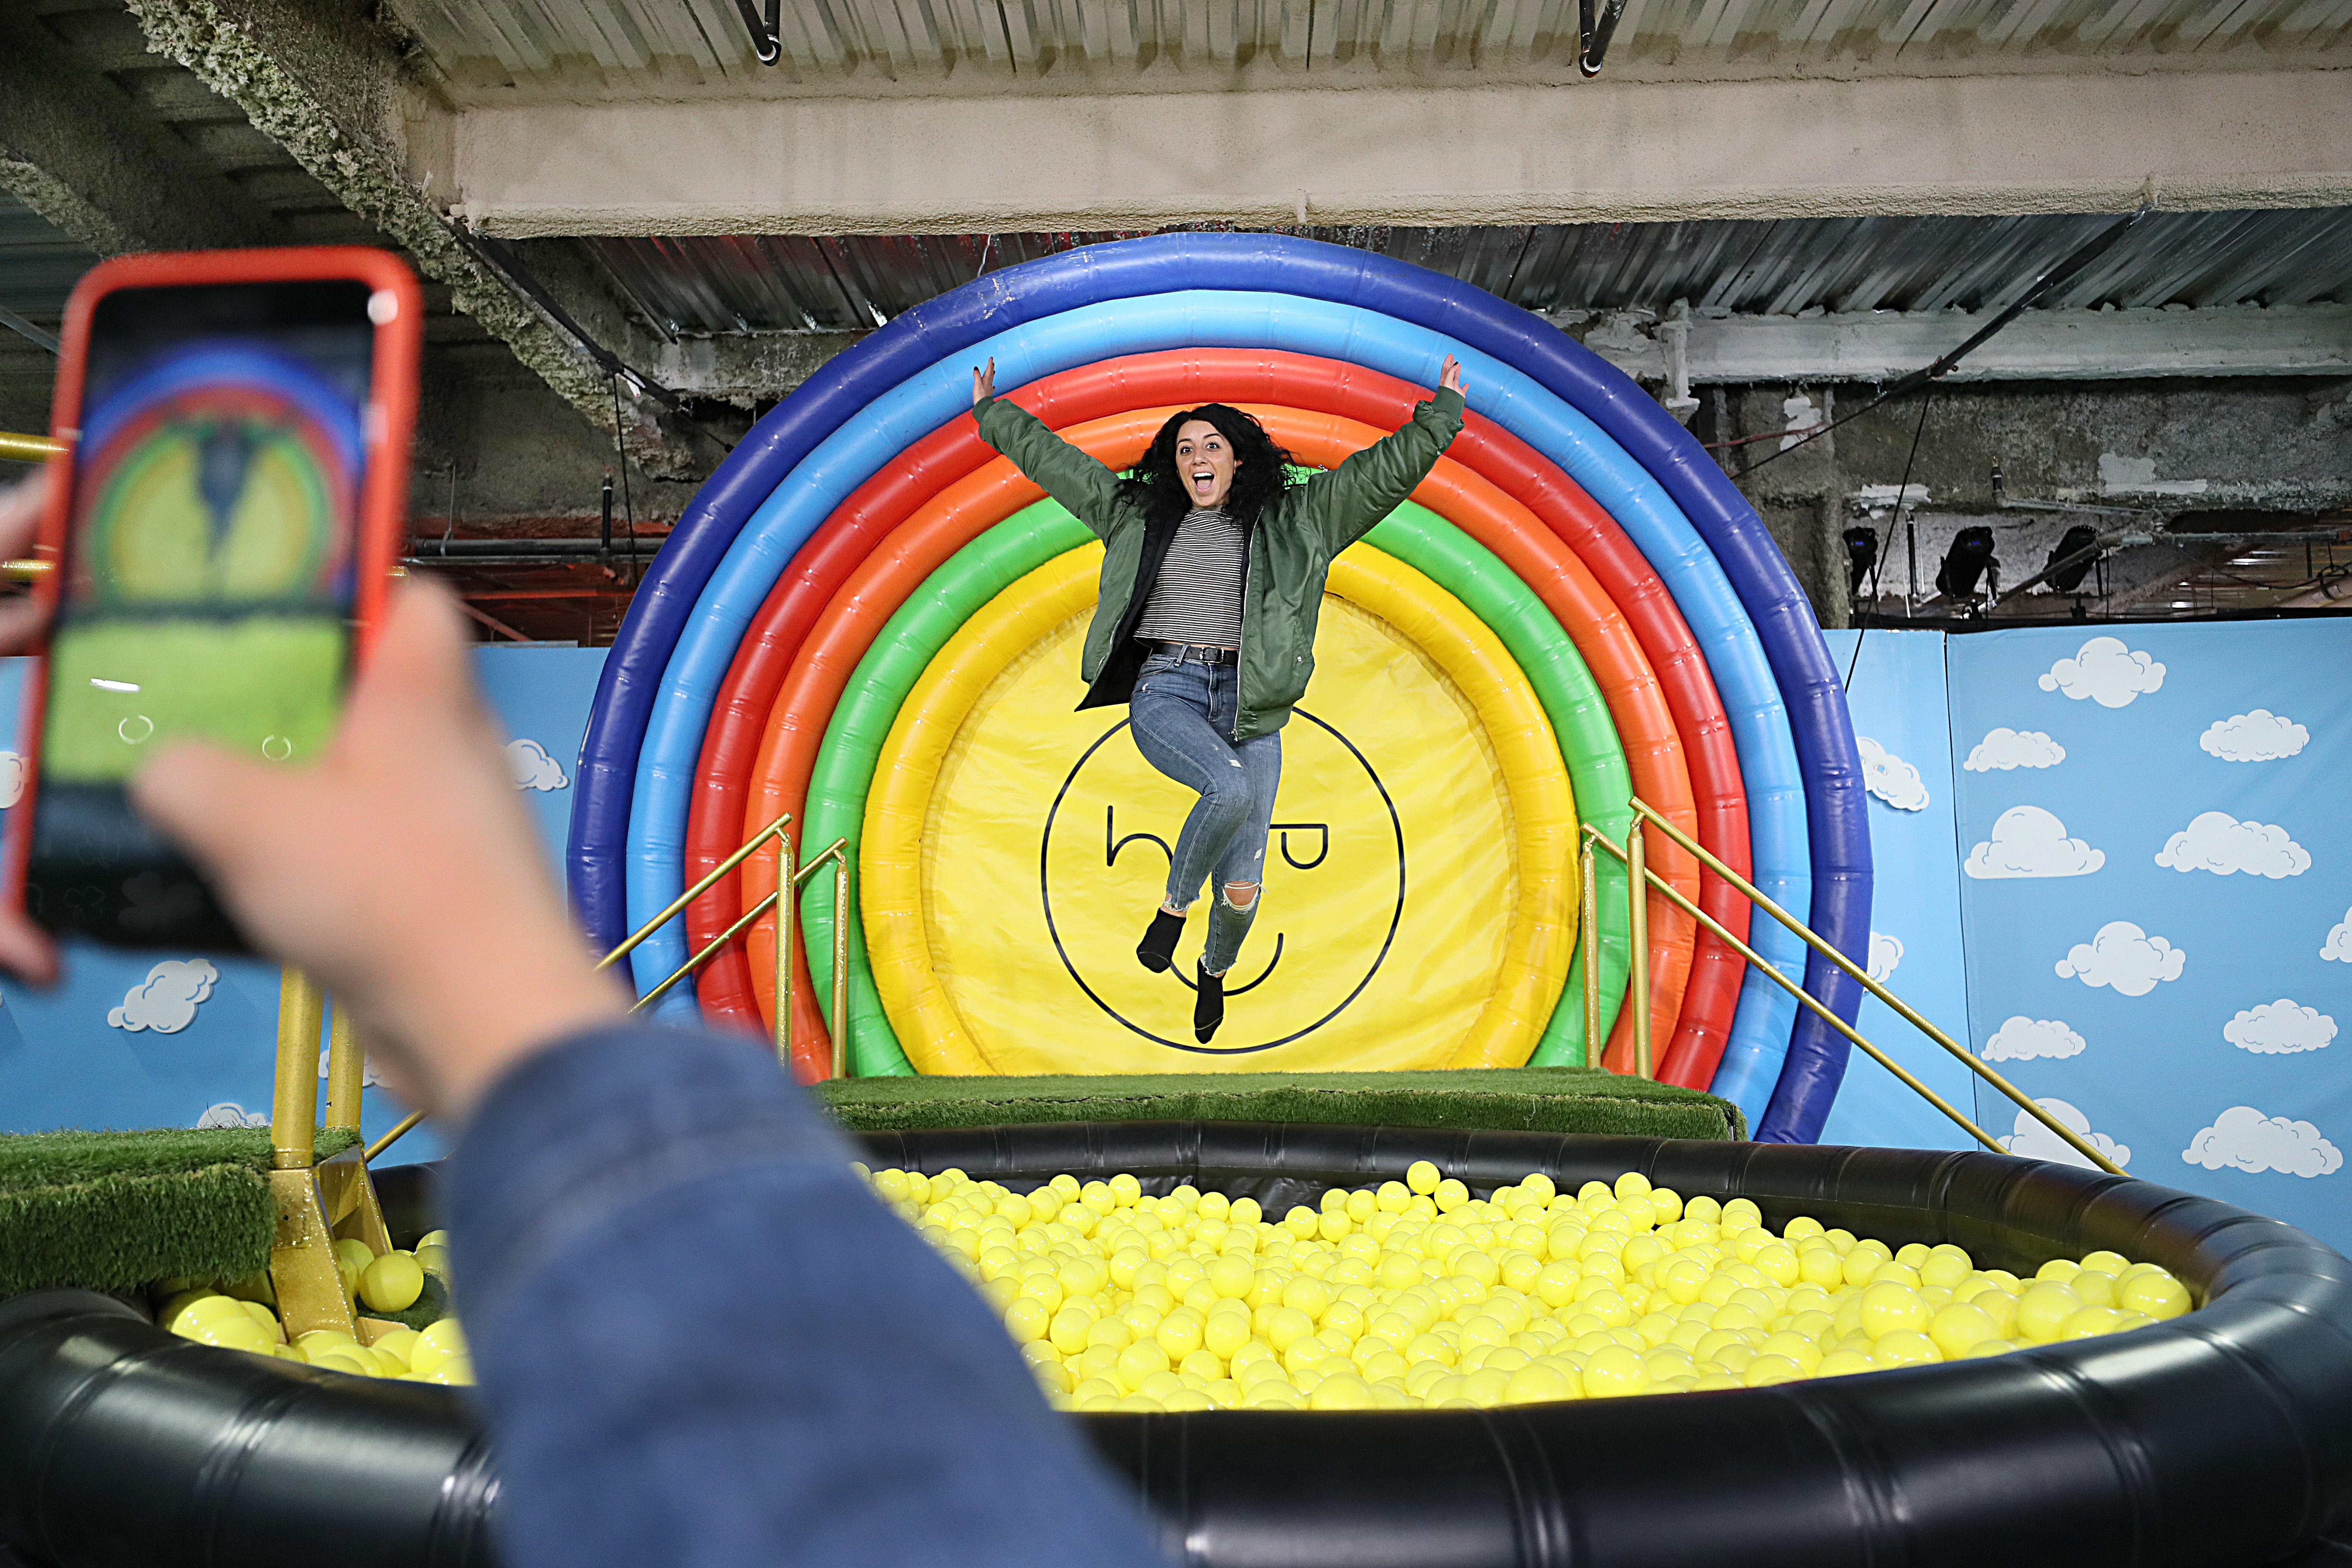 A young woman jumps into a ball pit in front of a rainbow bulls-eye design.